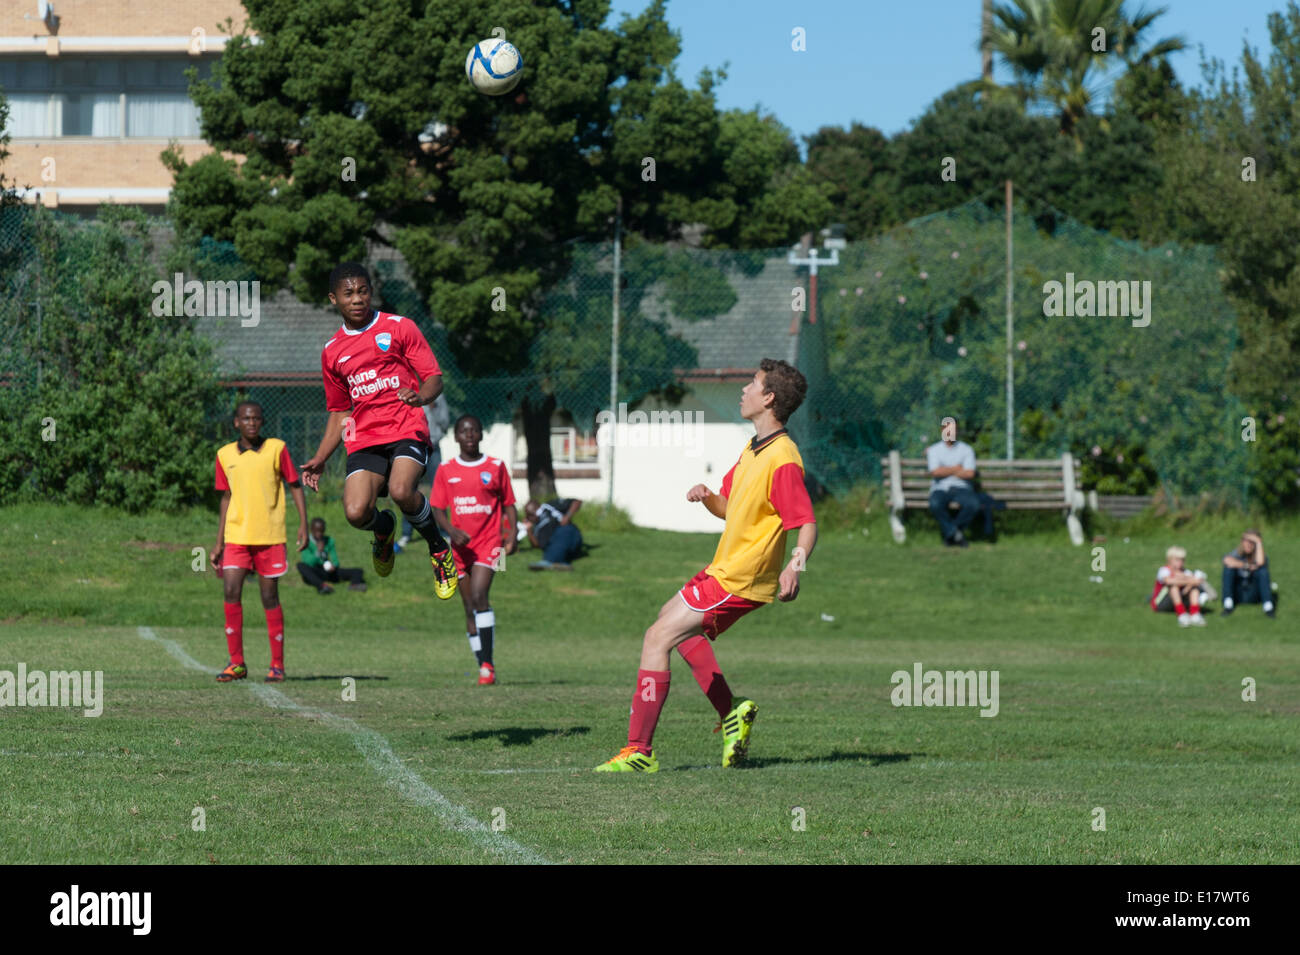 Junior football player jumping in the air heading the ball, Cape Town, South Africa Stock Photo